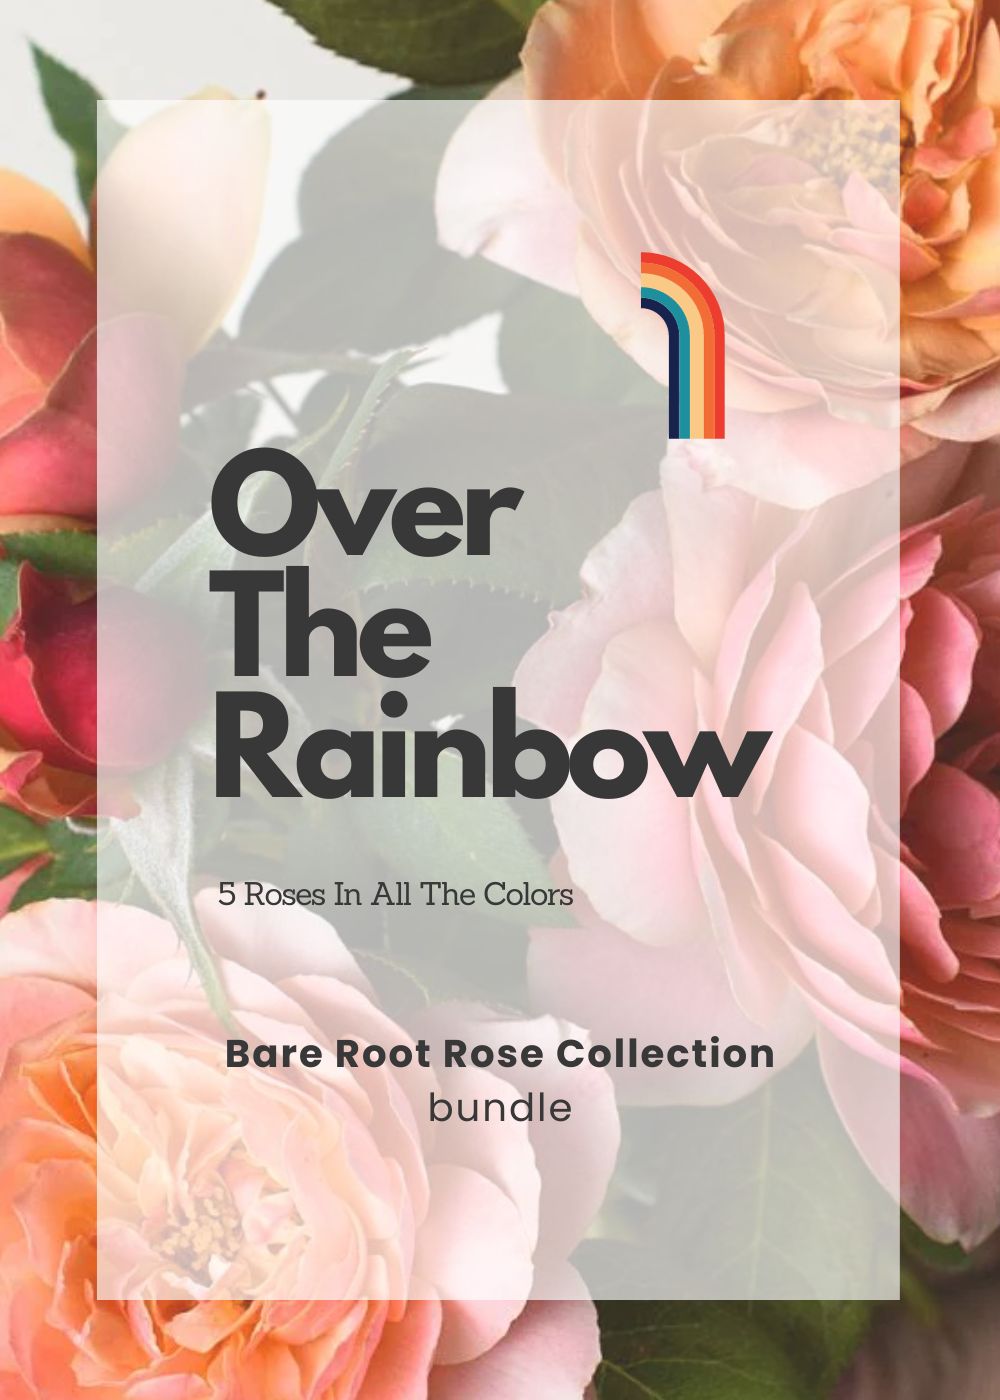 Over The Rainbow Bare Root Rose Collection - Menagerie Farm & Flower